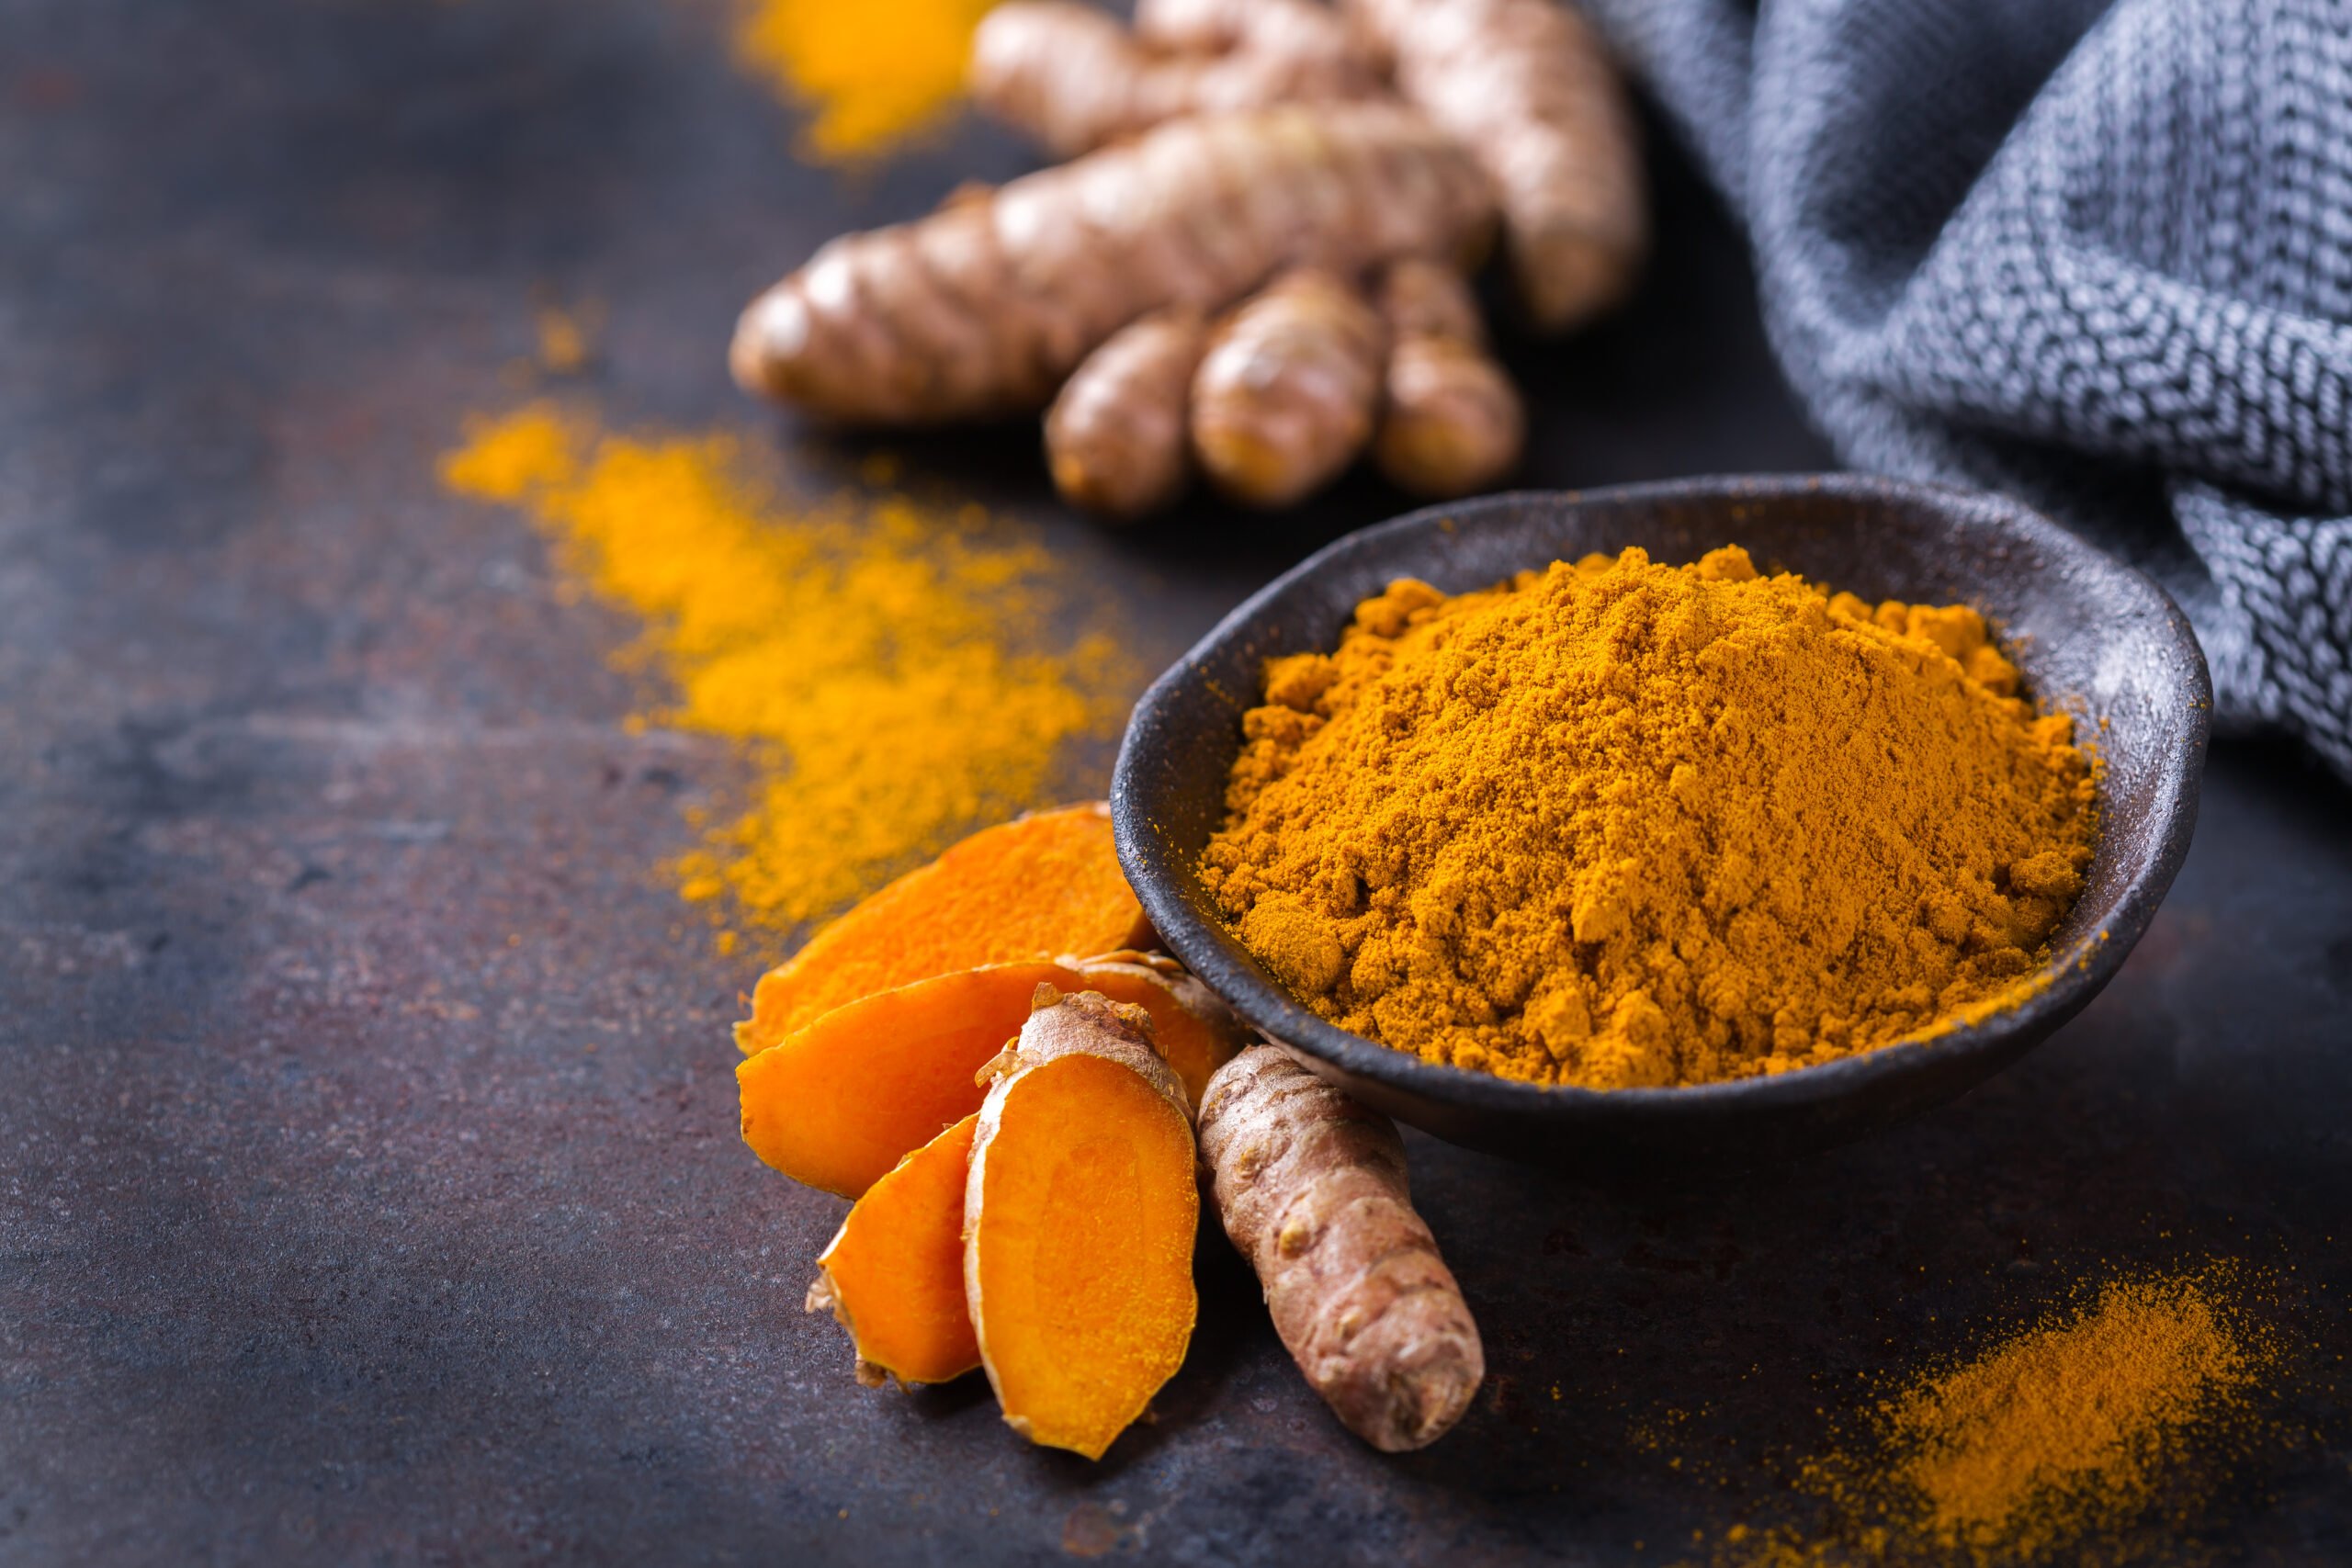 turmeric is good for